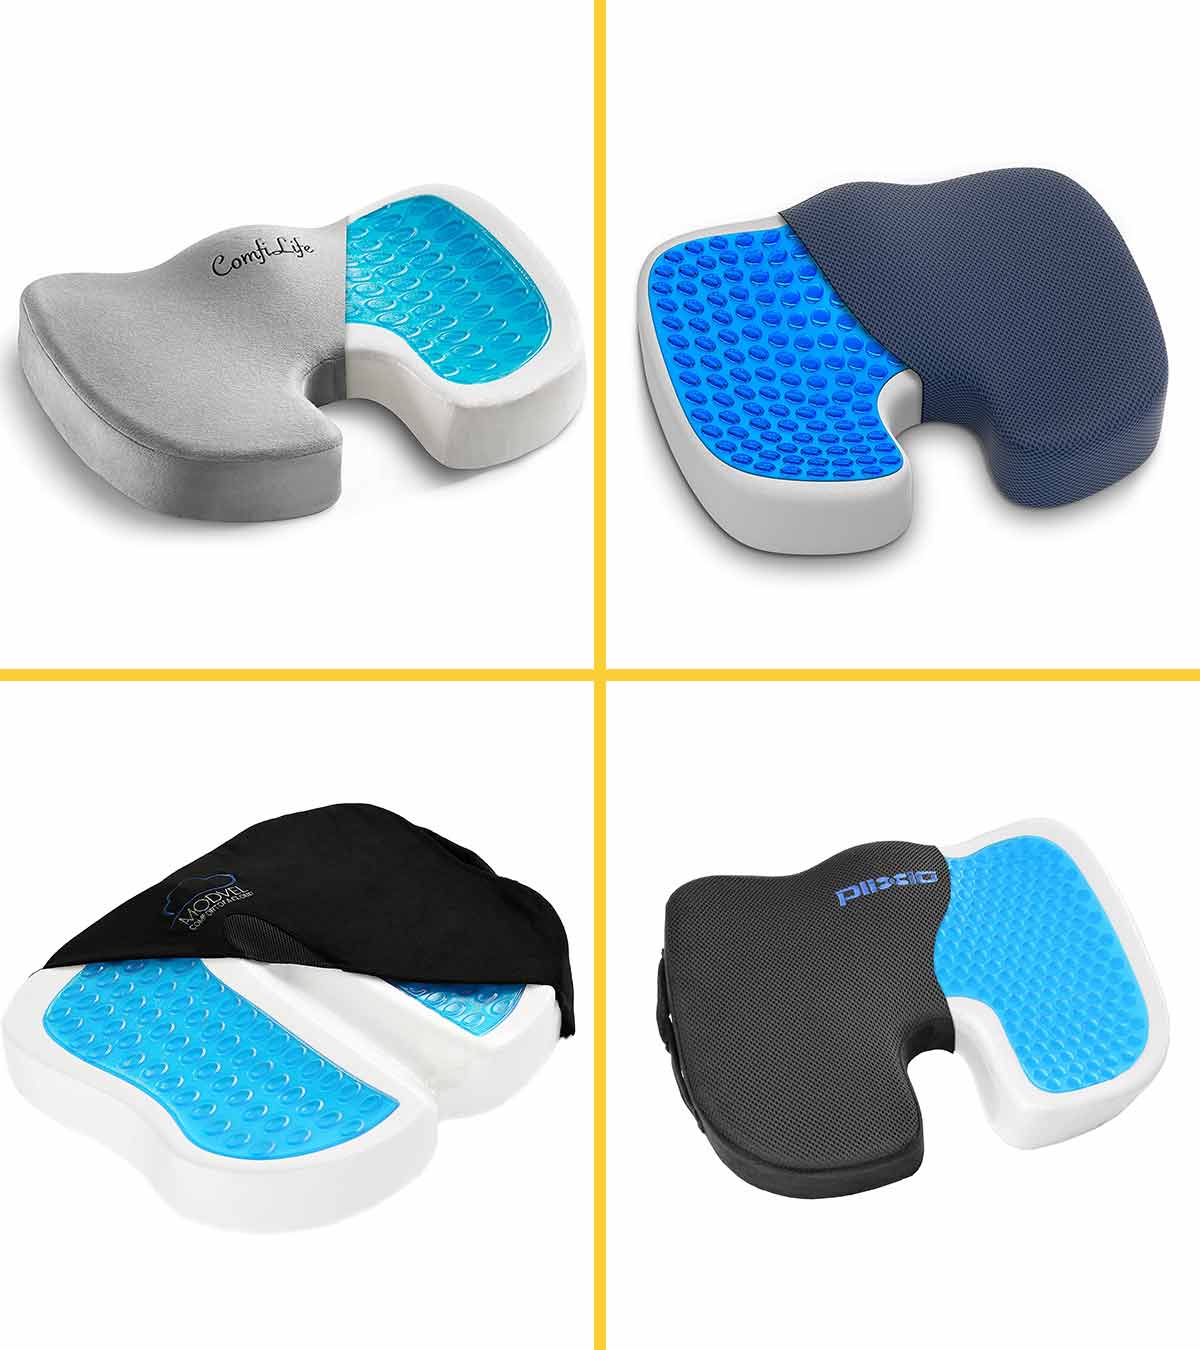 Memory Foam Structure Housing Gel Inserts! Plush Fabric Hip Pain Reduce Back KOTO Cloud Gel Cushion for Lumbar and Coccyx Support Non-Slip Bottom Leg 